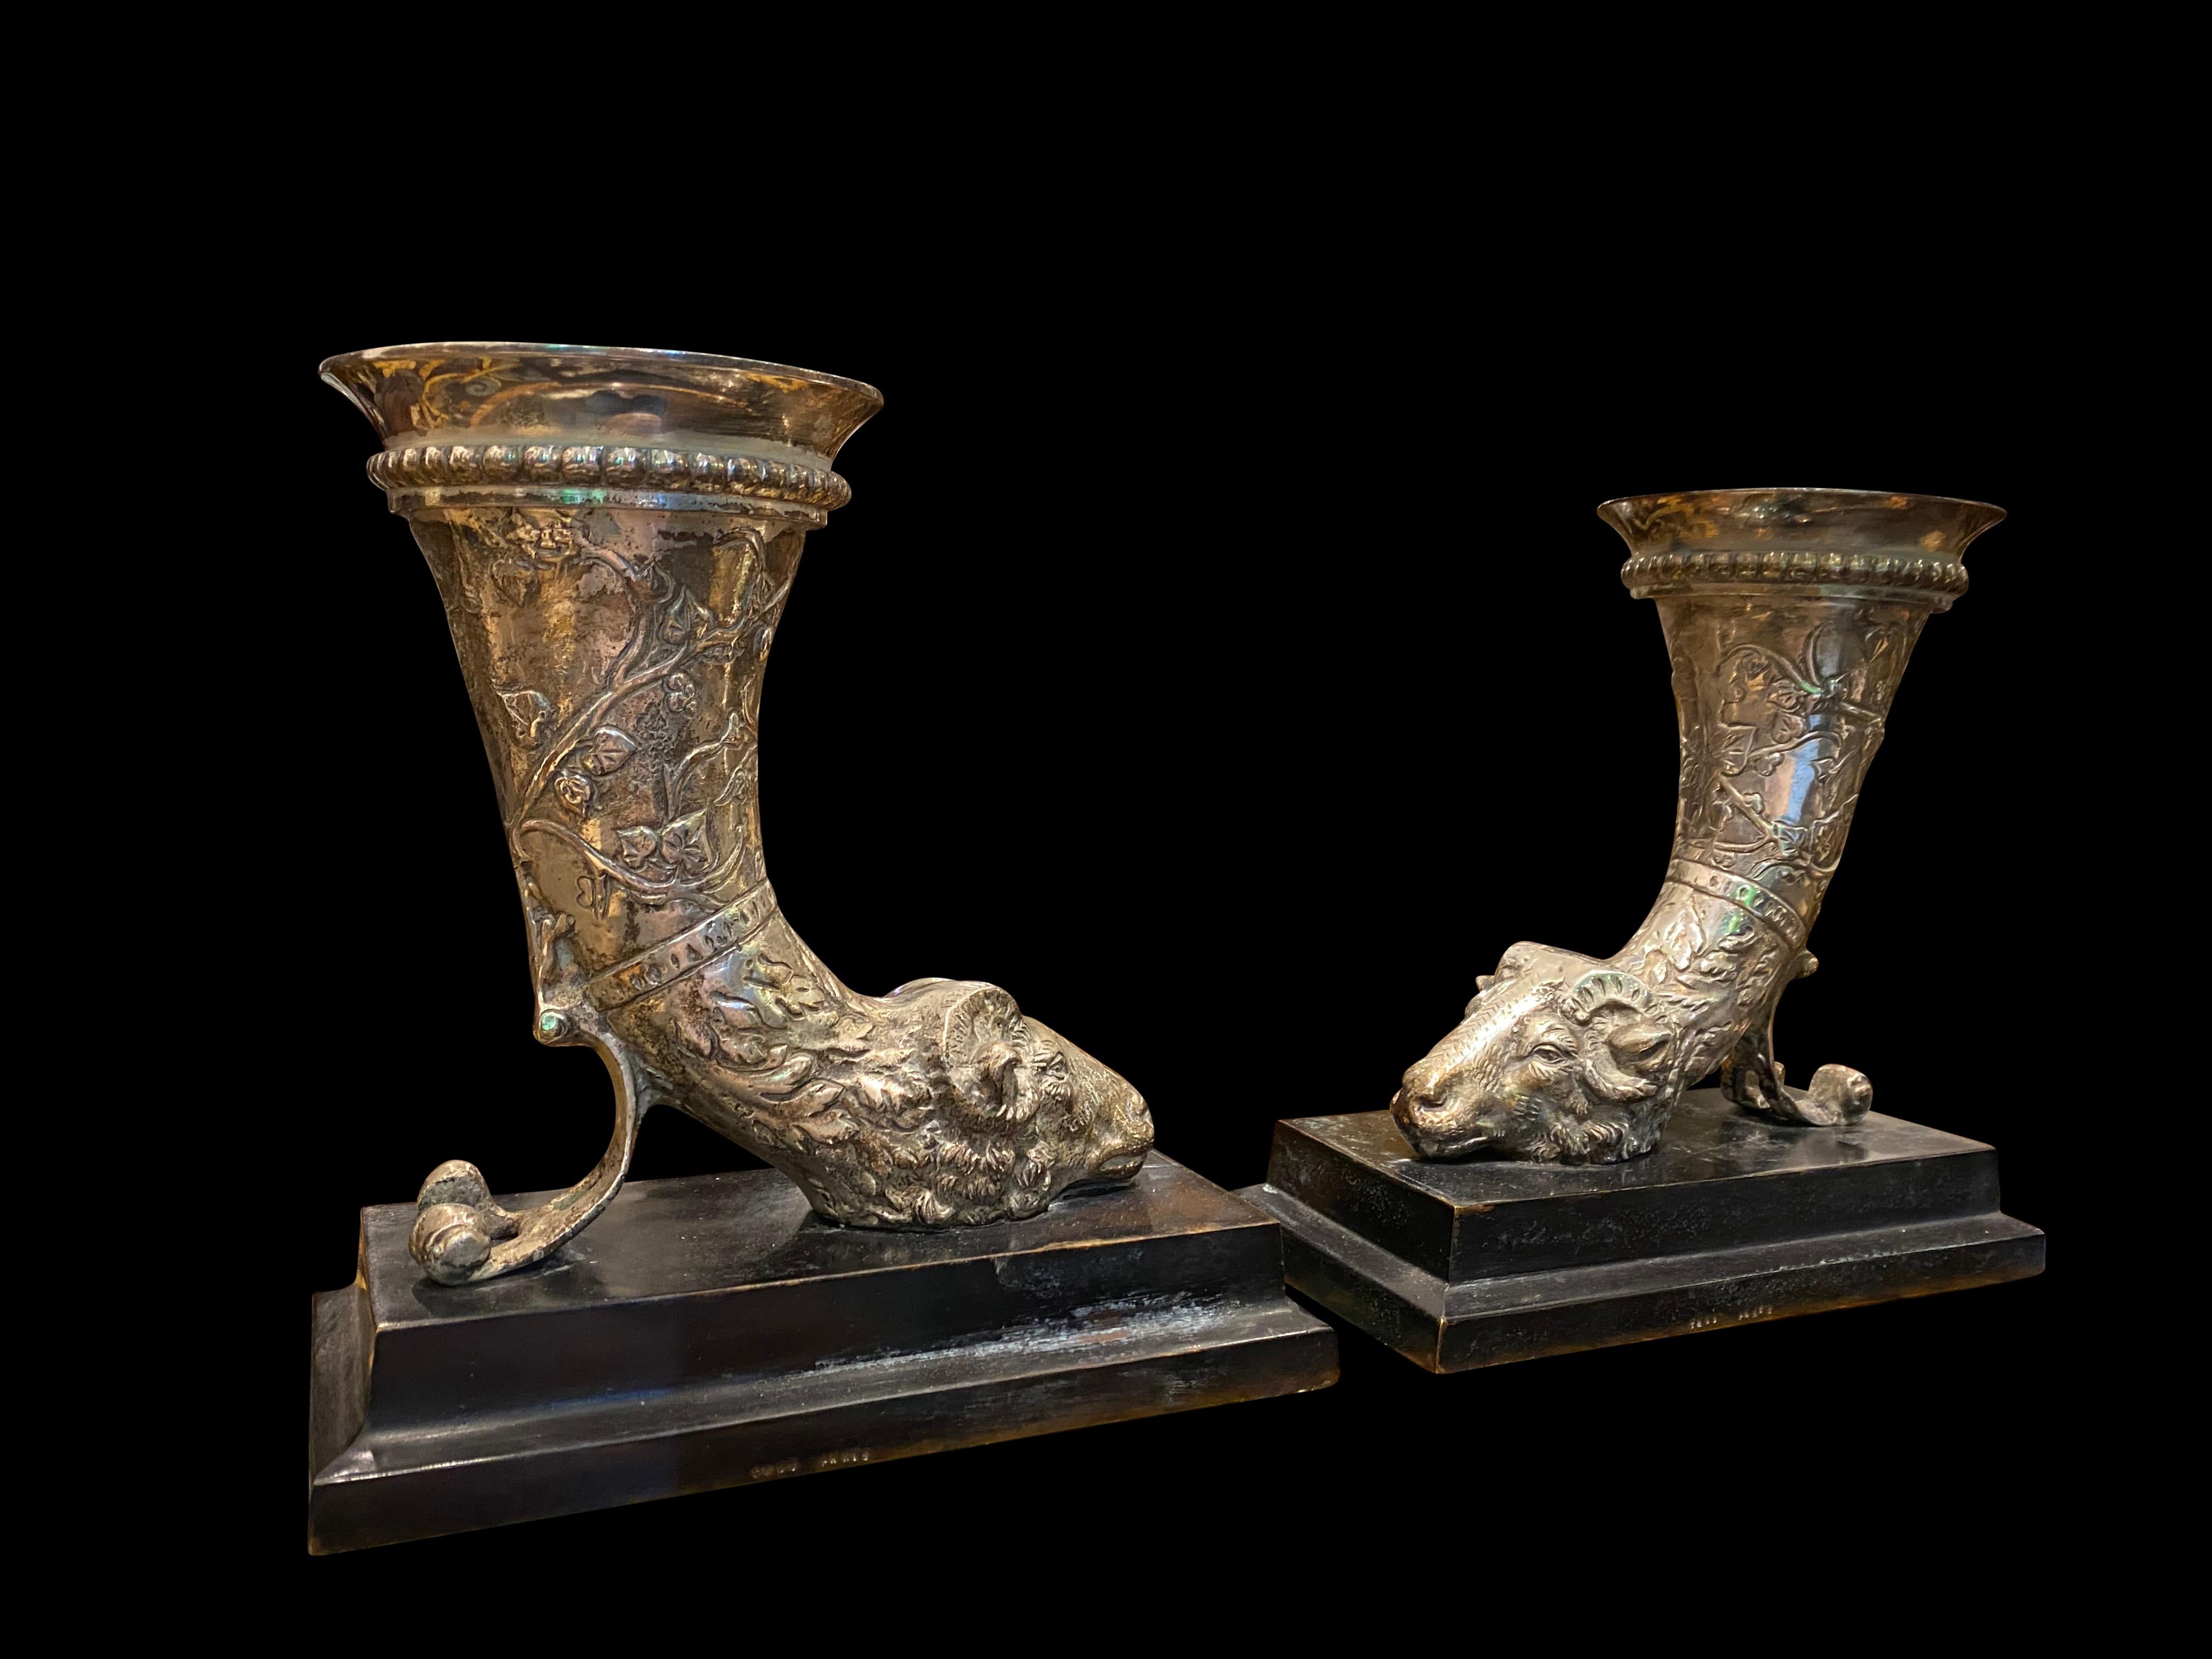 An extraordinary pair of 19th century silver plated ram head book ends. Fantastic decorated pieces, situated on black marble bases. Floral engravings with fantastic detail.